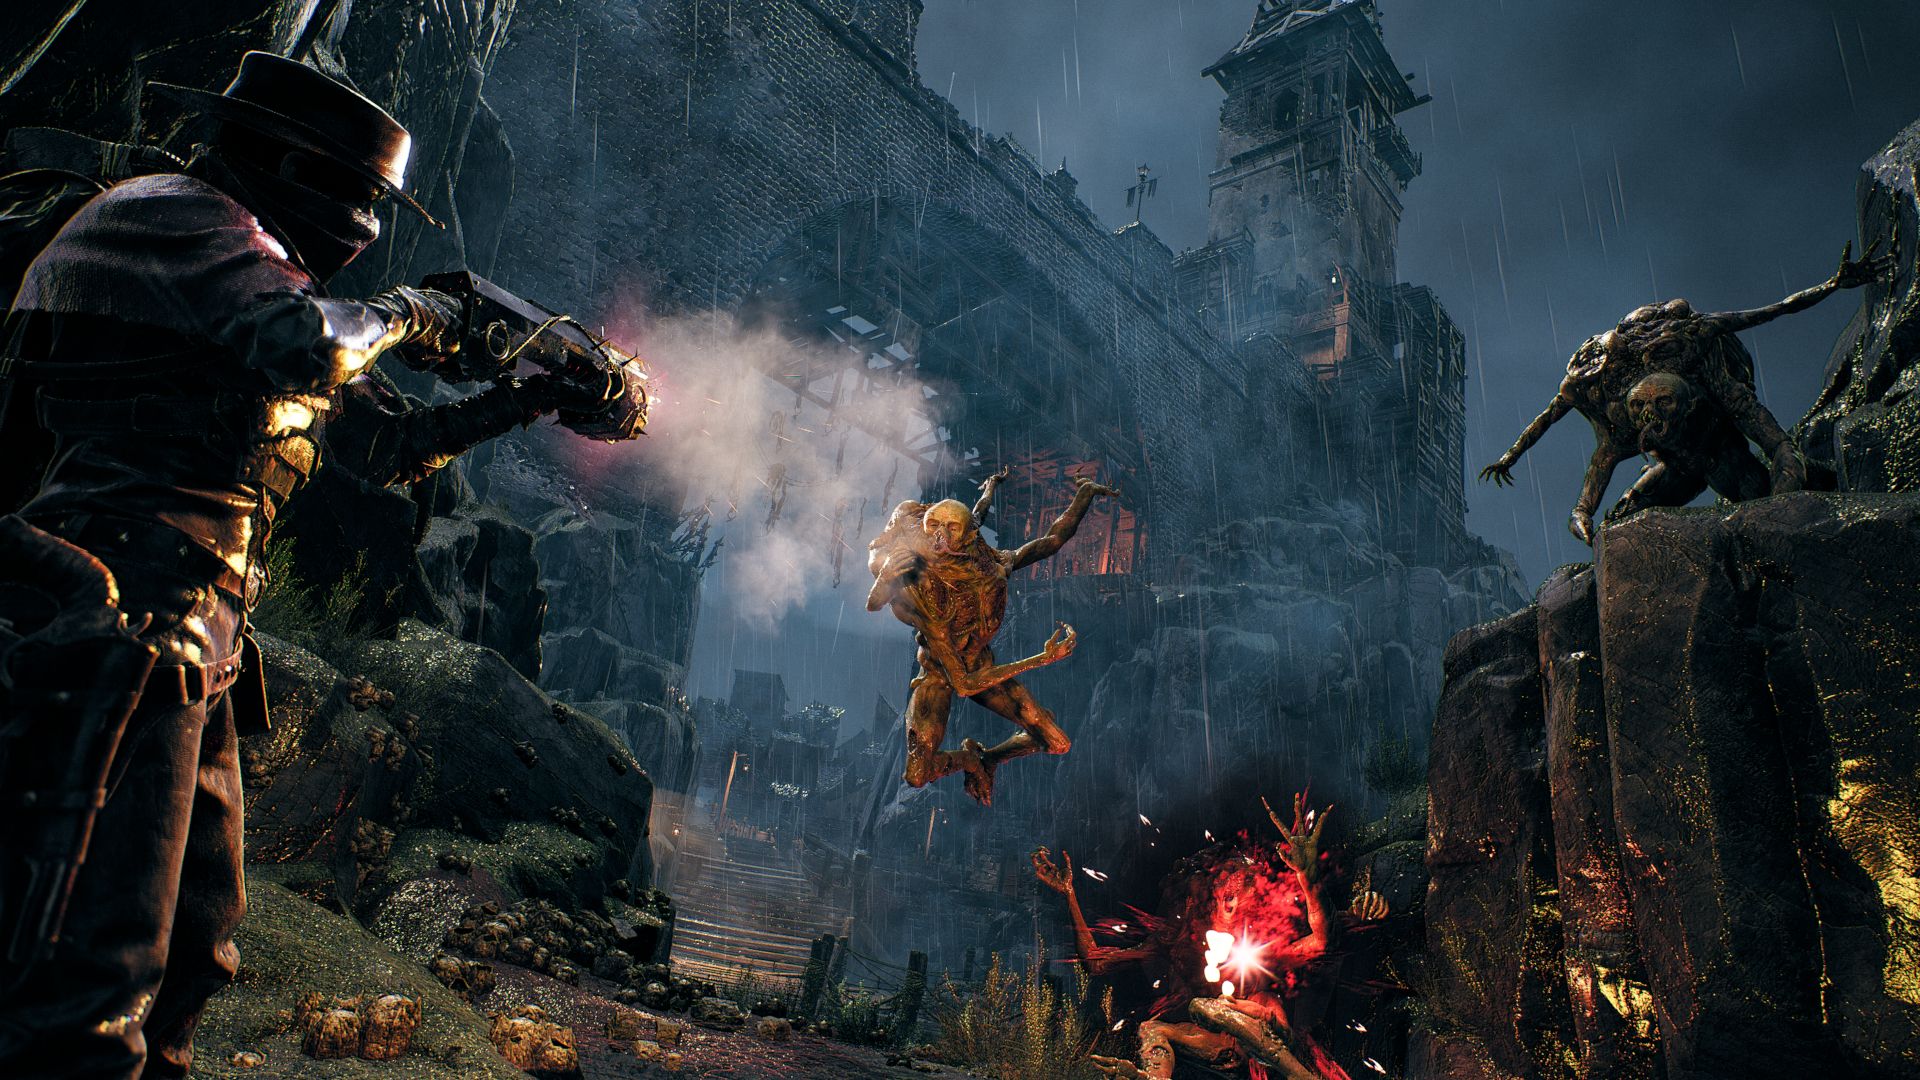 Screenshot shows Remnant 2 DLC enemies attacking the player under the moonlight shining through a crumbling tower.